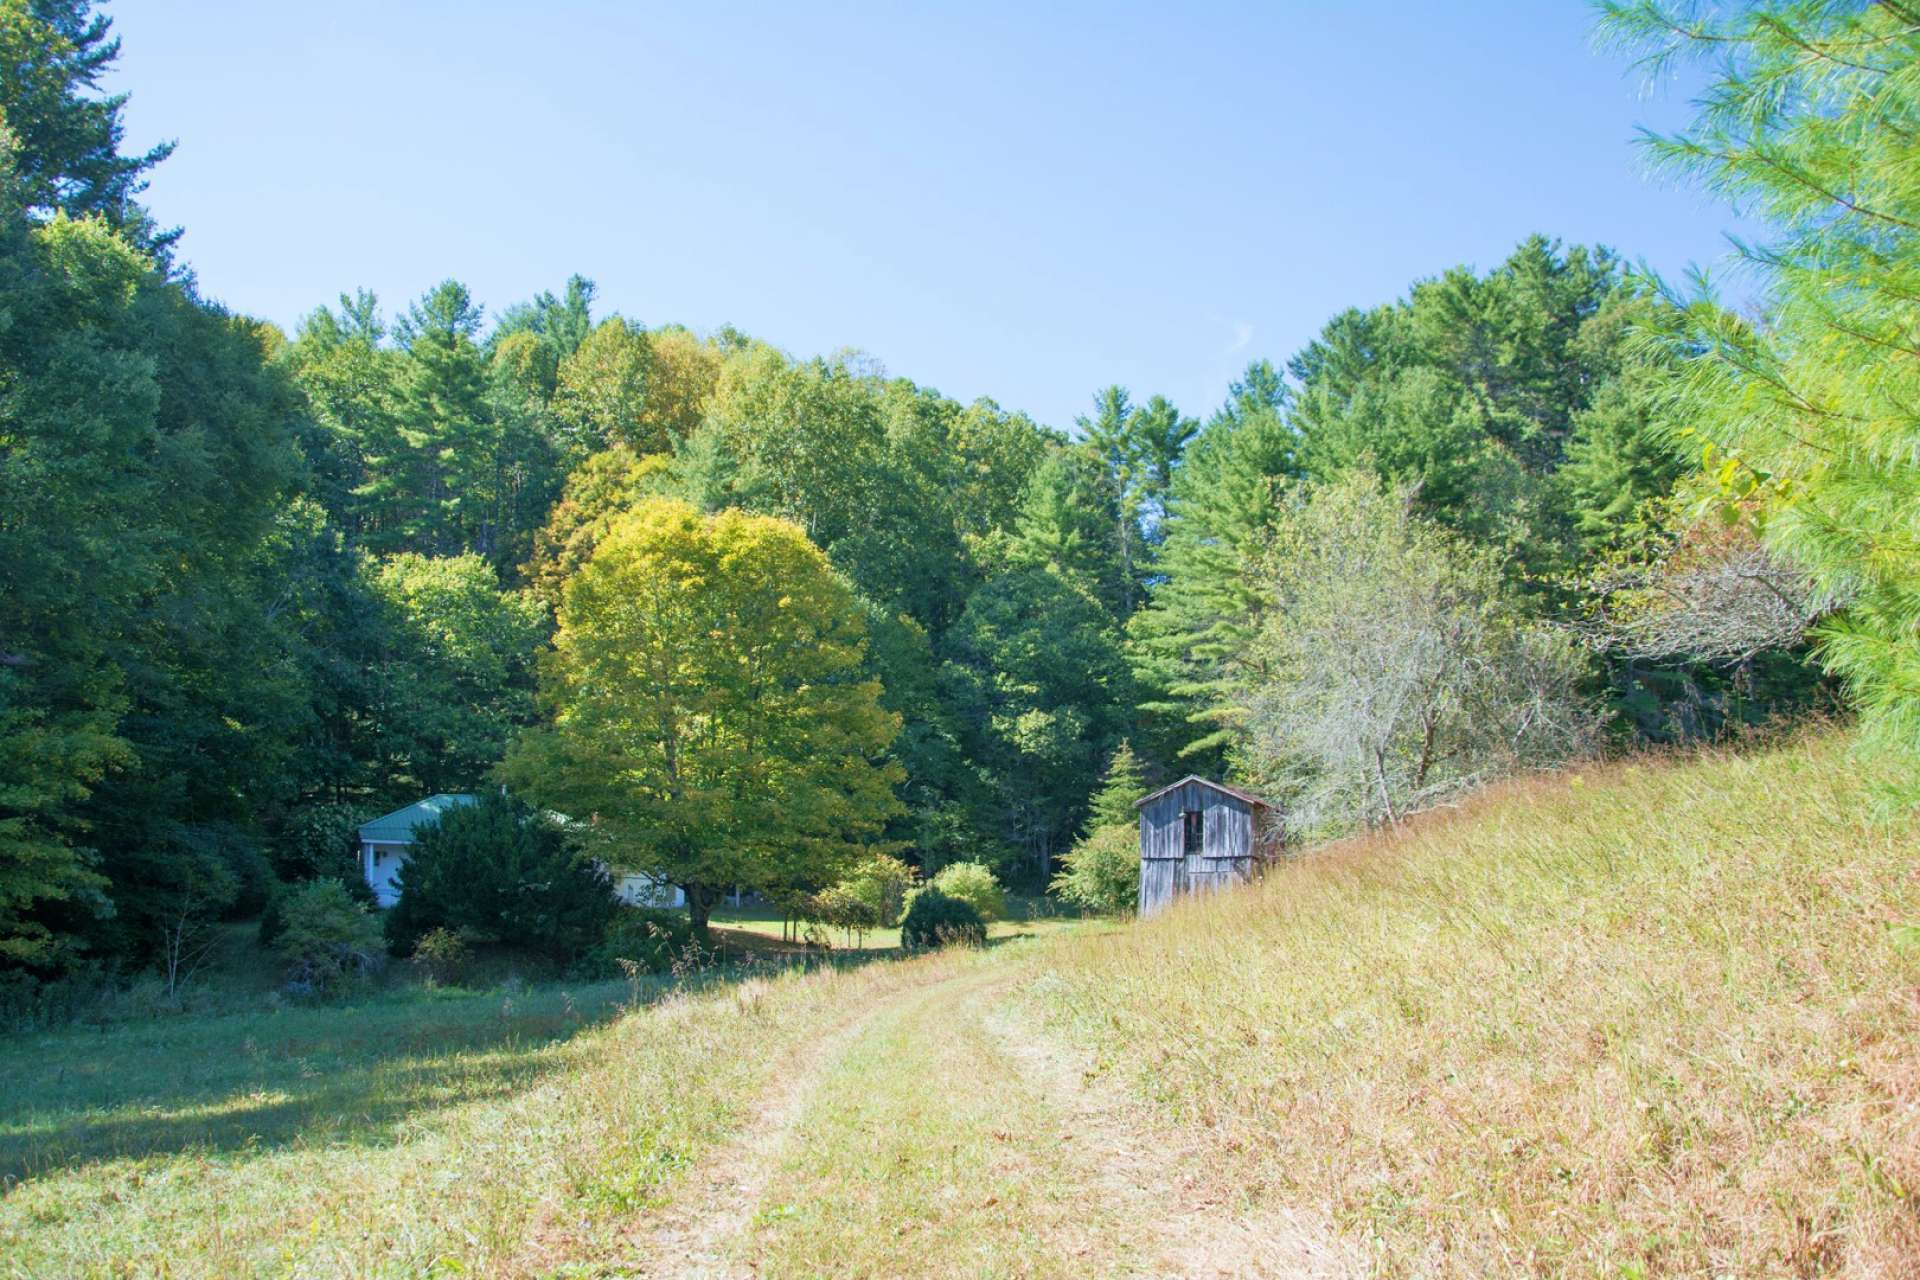 Travel on down the private country lane leading to the vintage 2-bedroom, 1-bath farmhouse.